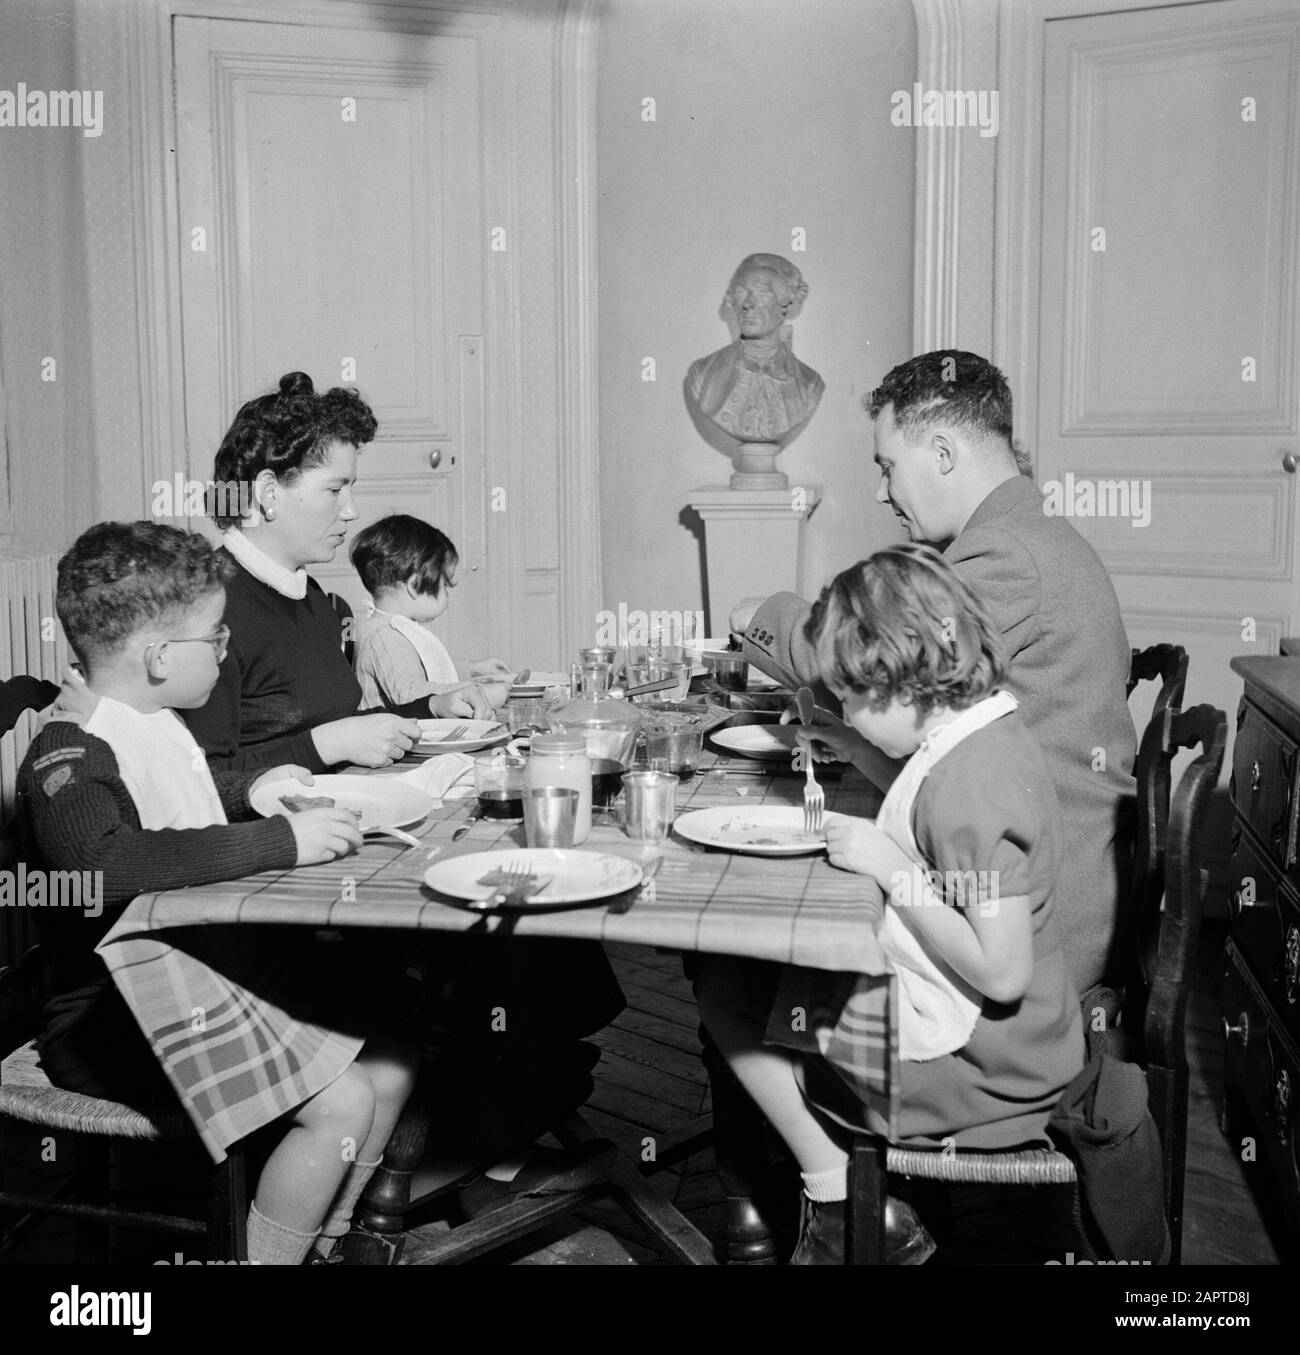 Residents of an apartment building in Paris  Family at the table during the meal Date: 1950 Location: France, Paris Keywords: sculptures, families, children, meals, crockery Stock Photo